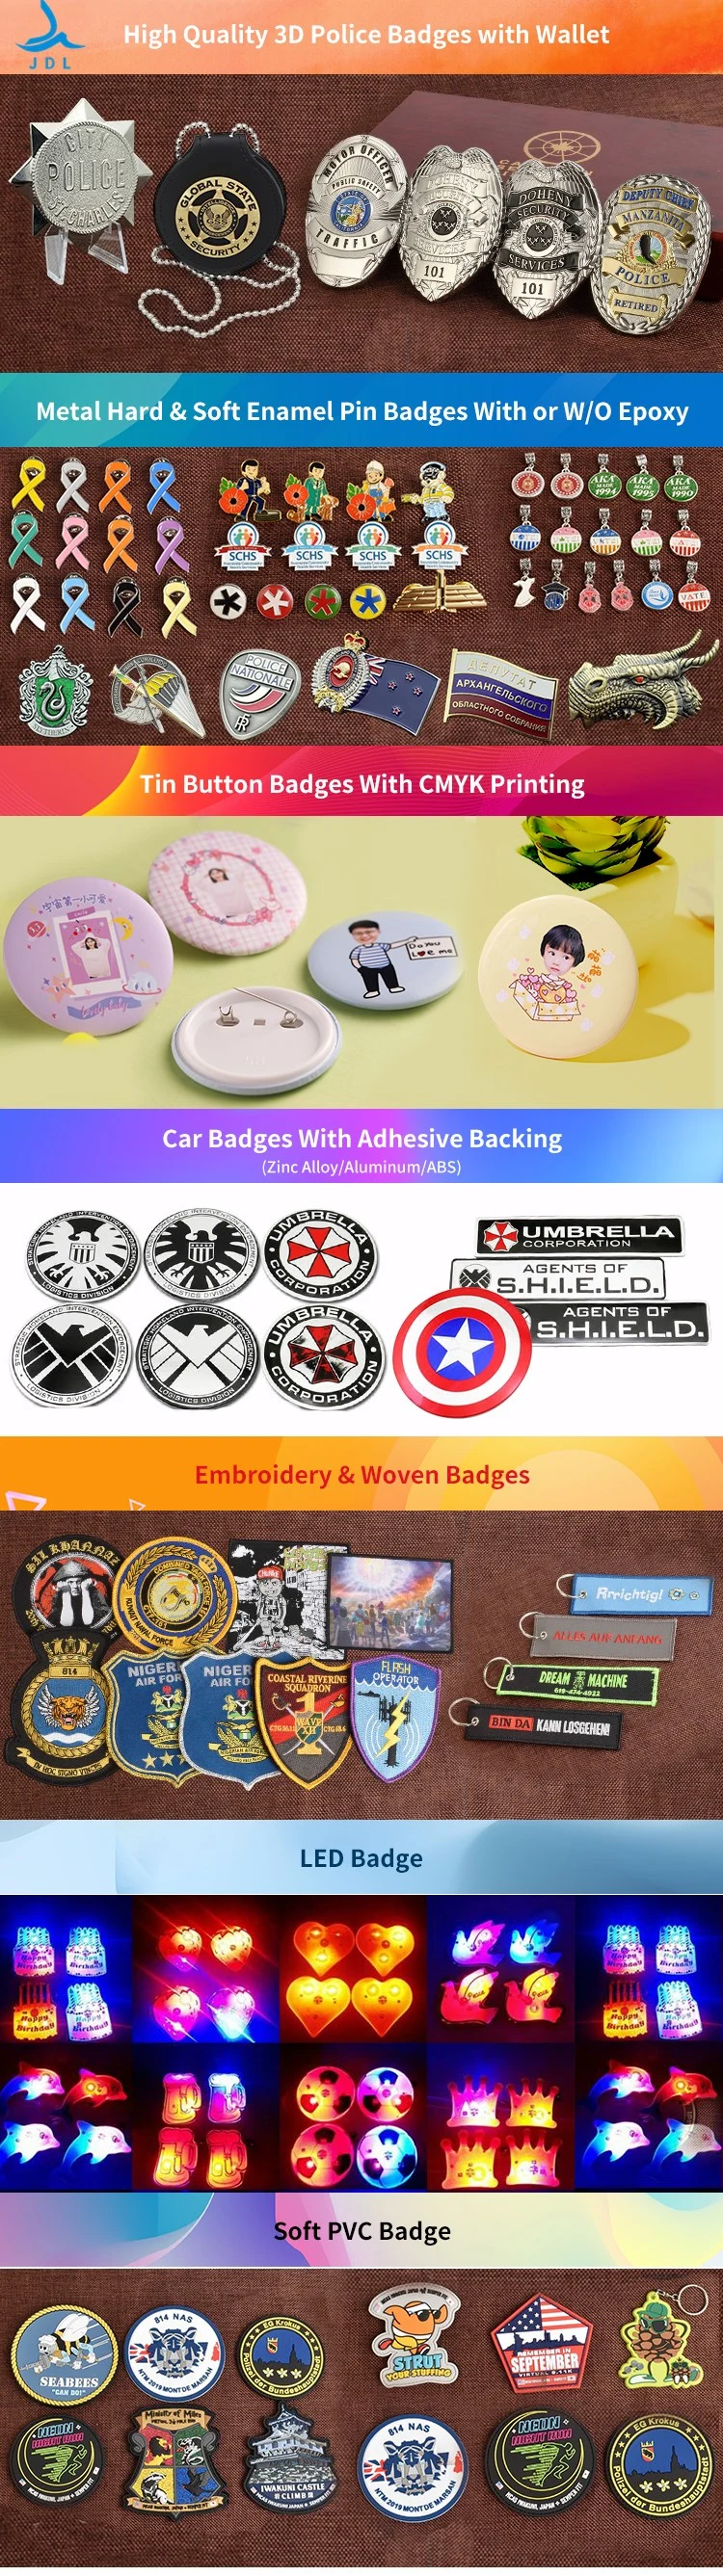 Amazing Promotion Activity Size Shield Lapel Pin/Badge with Customized Design Quotes (388)